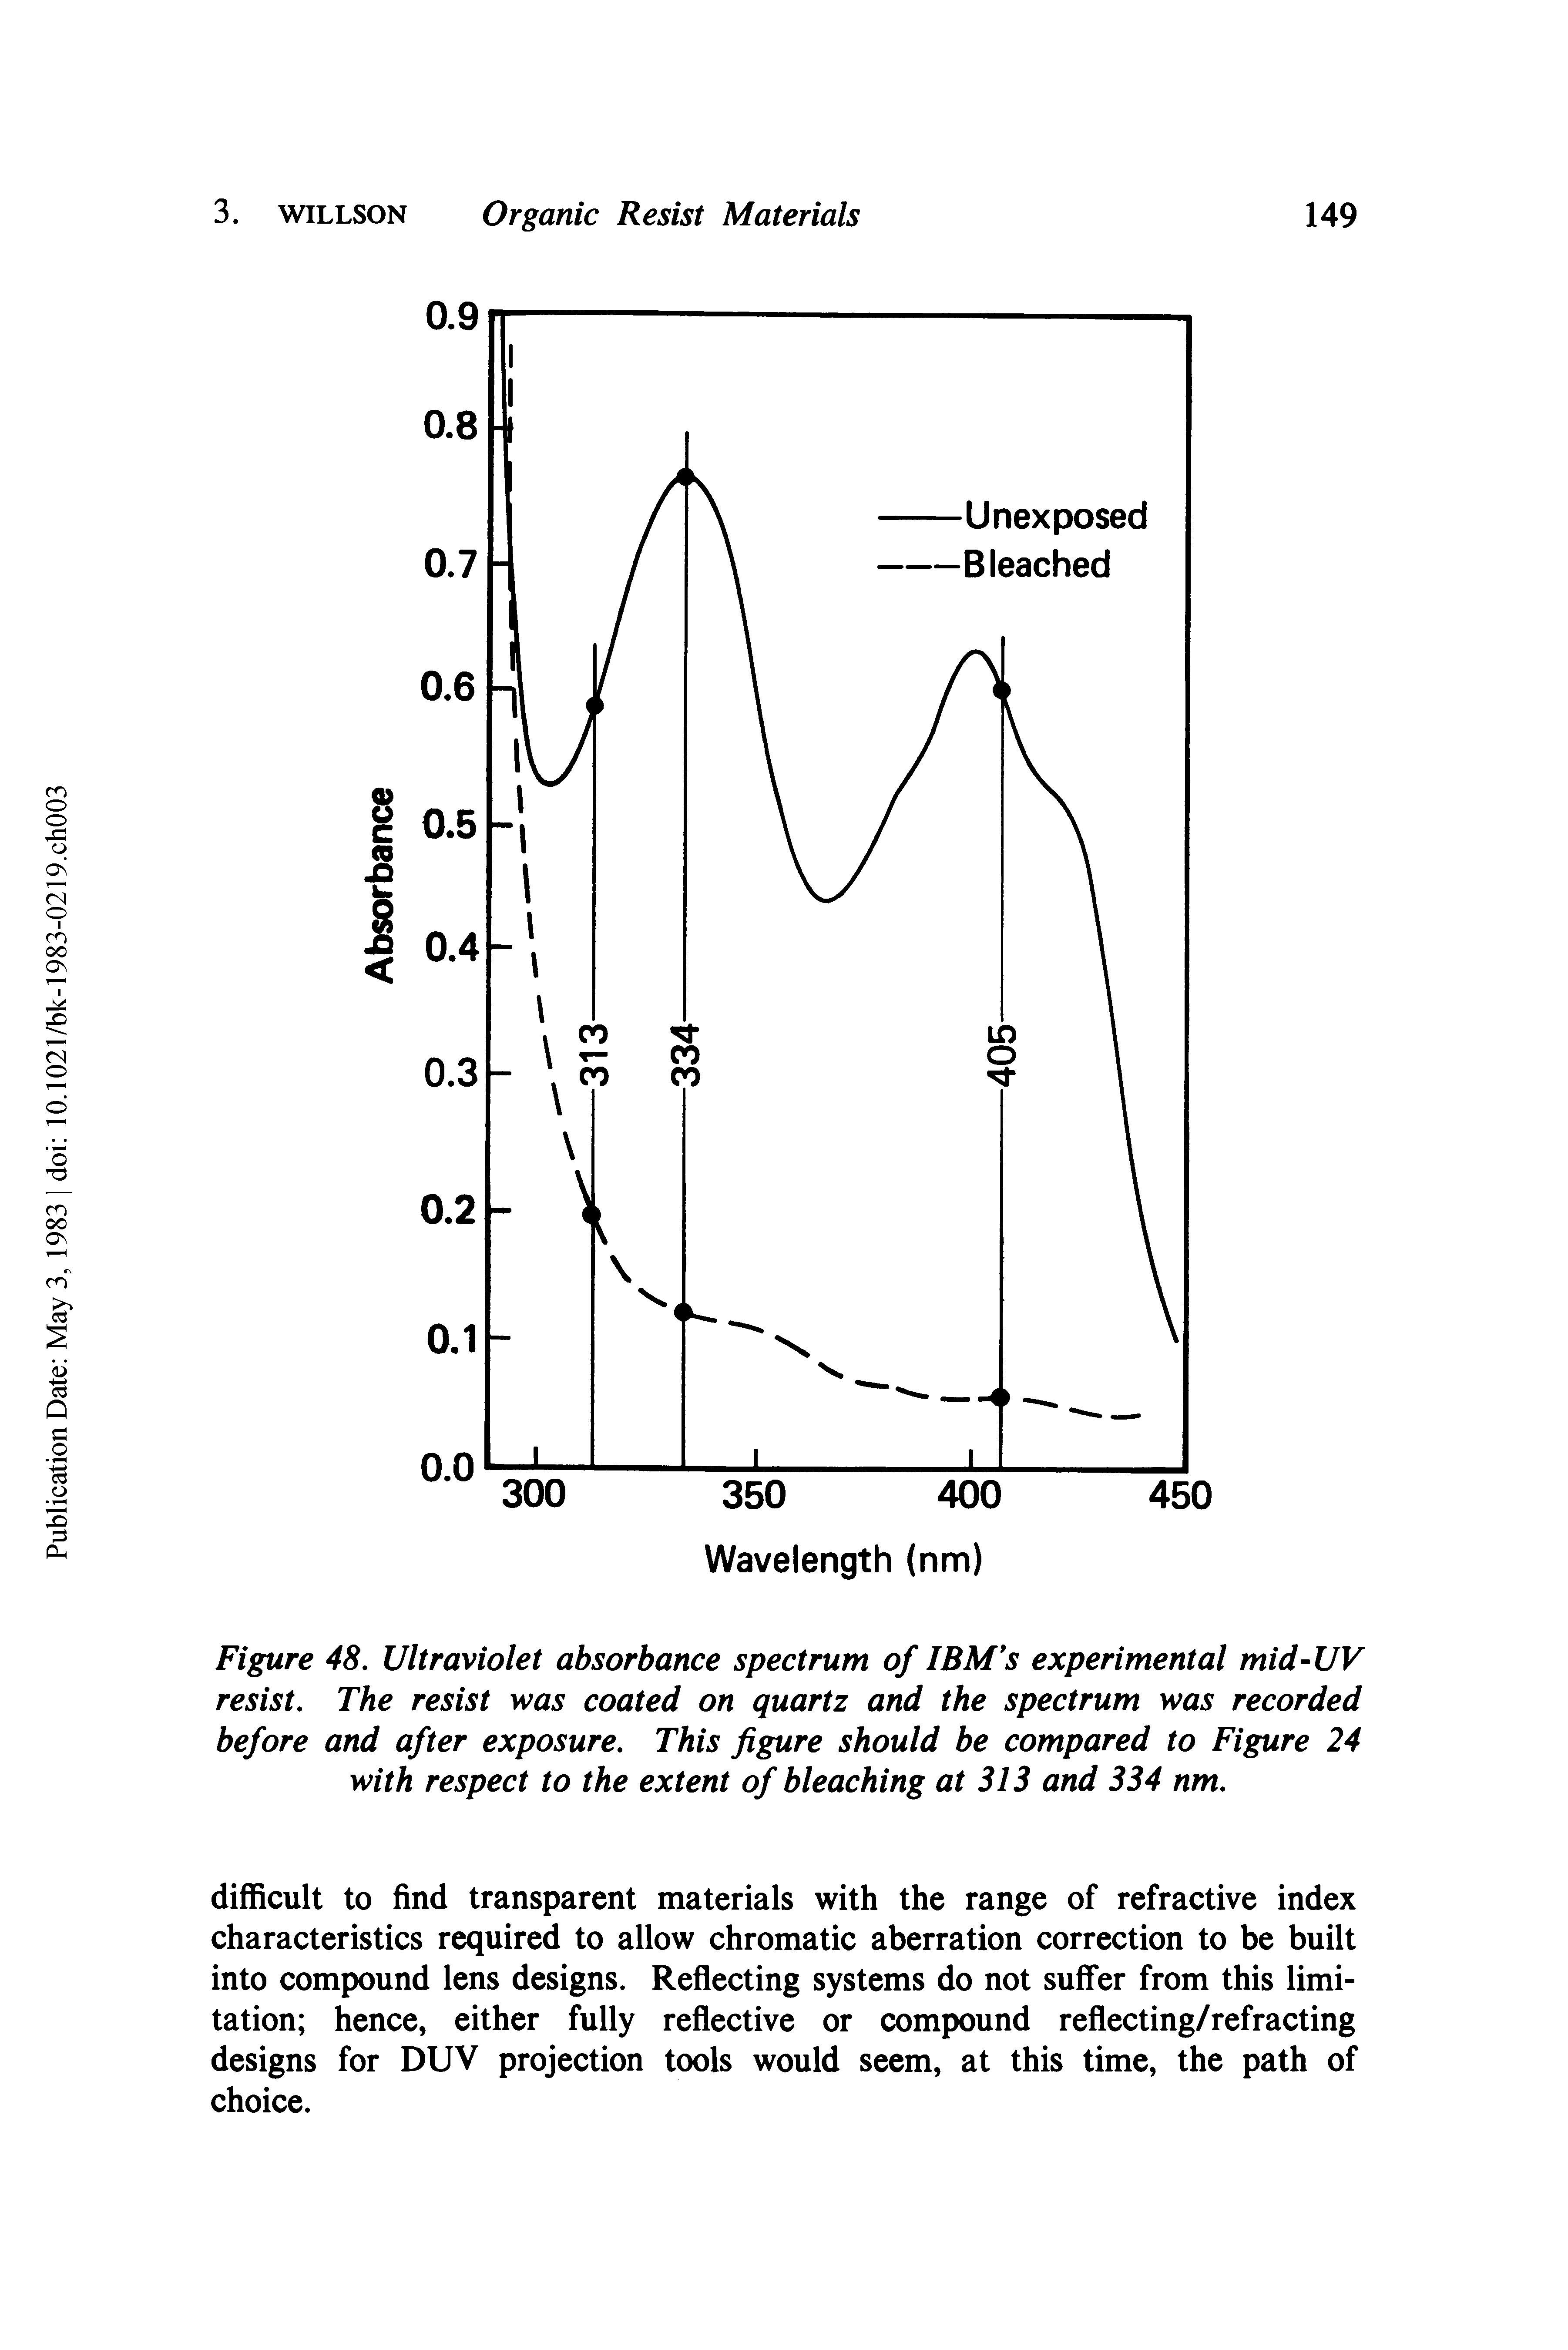 Figure 48. Ultraviolet absorbance spectrum of IBM s experimental mid UV resist. The resist was coated on quartz and the spectrum was recorded before and after exposure. This figure should be compared to Figure 24 with respect to the extent of bleaching at 313 and 334 nm.